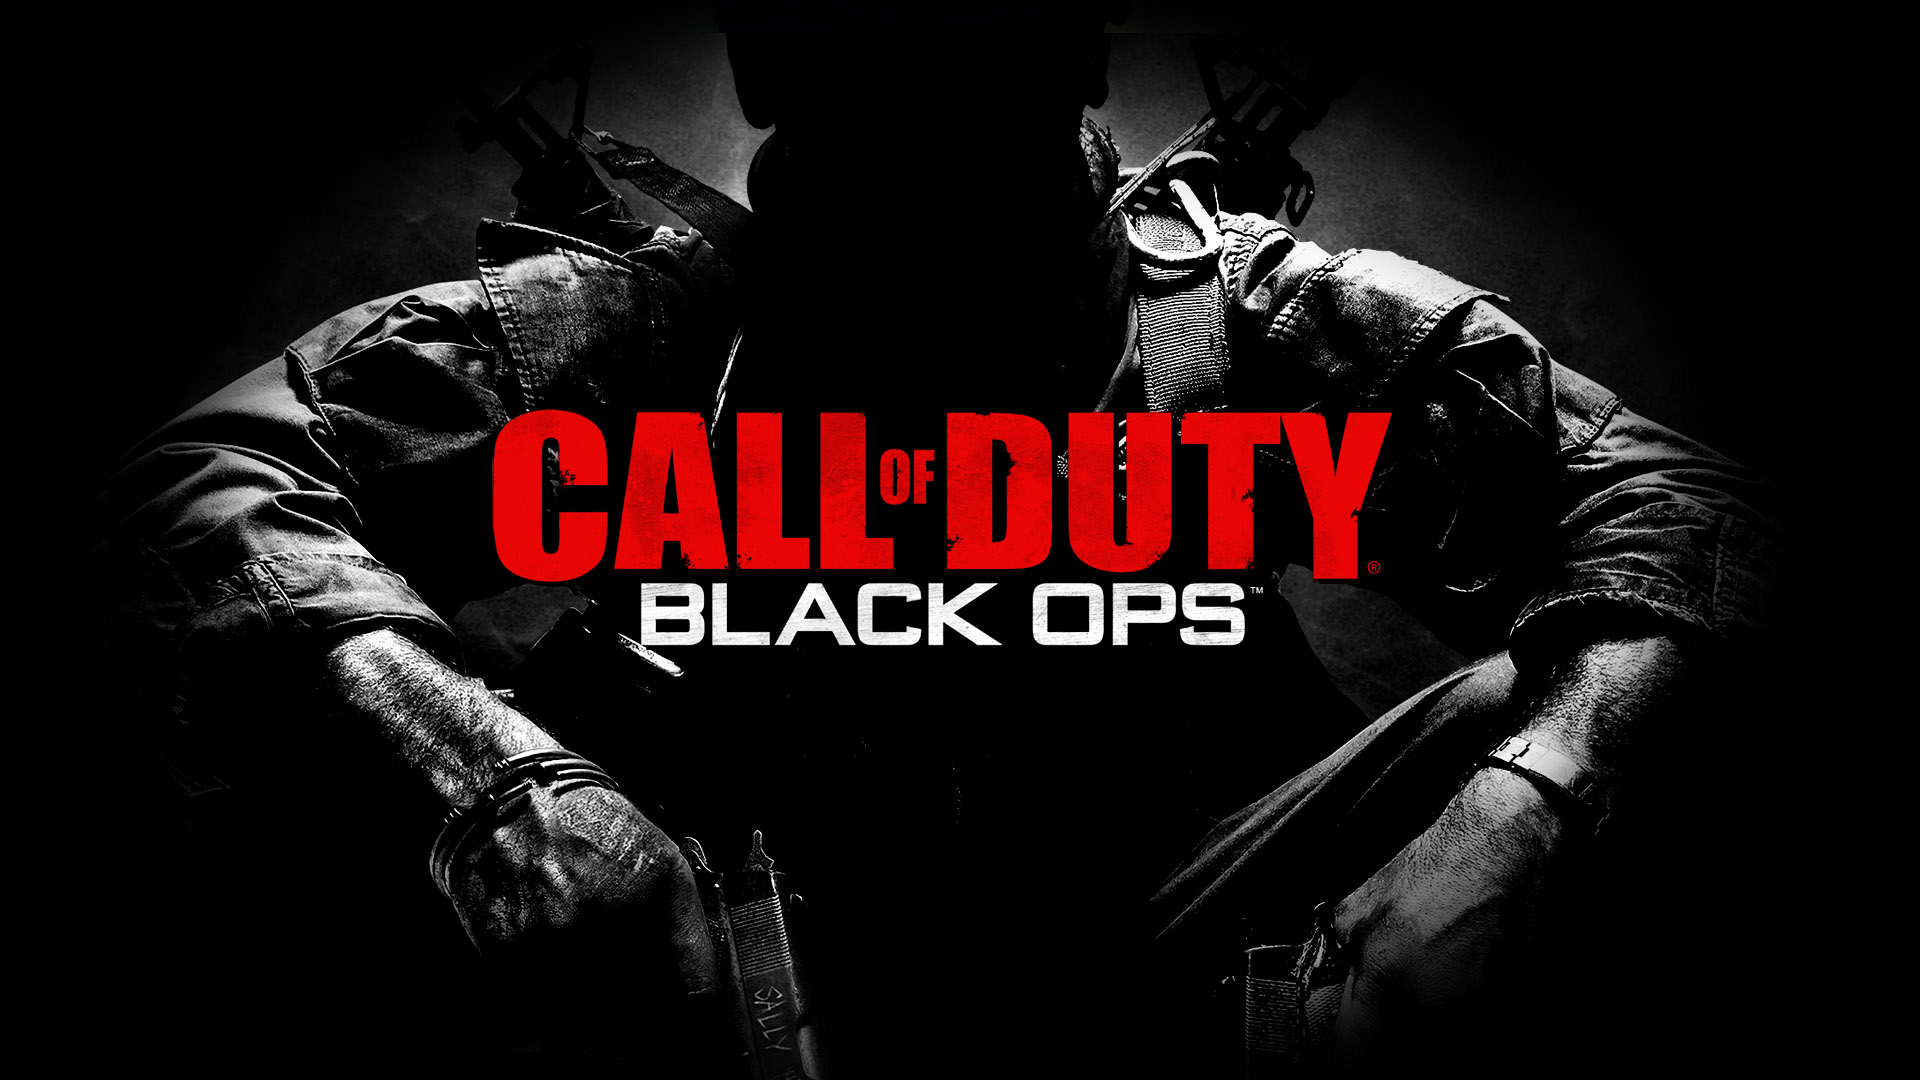 Call of Duty Black Ops Wallpapers